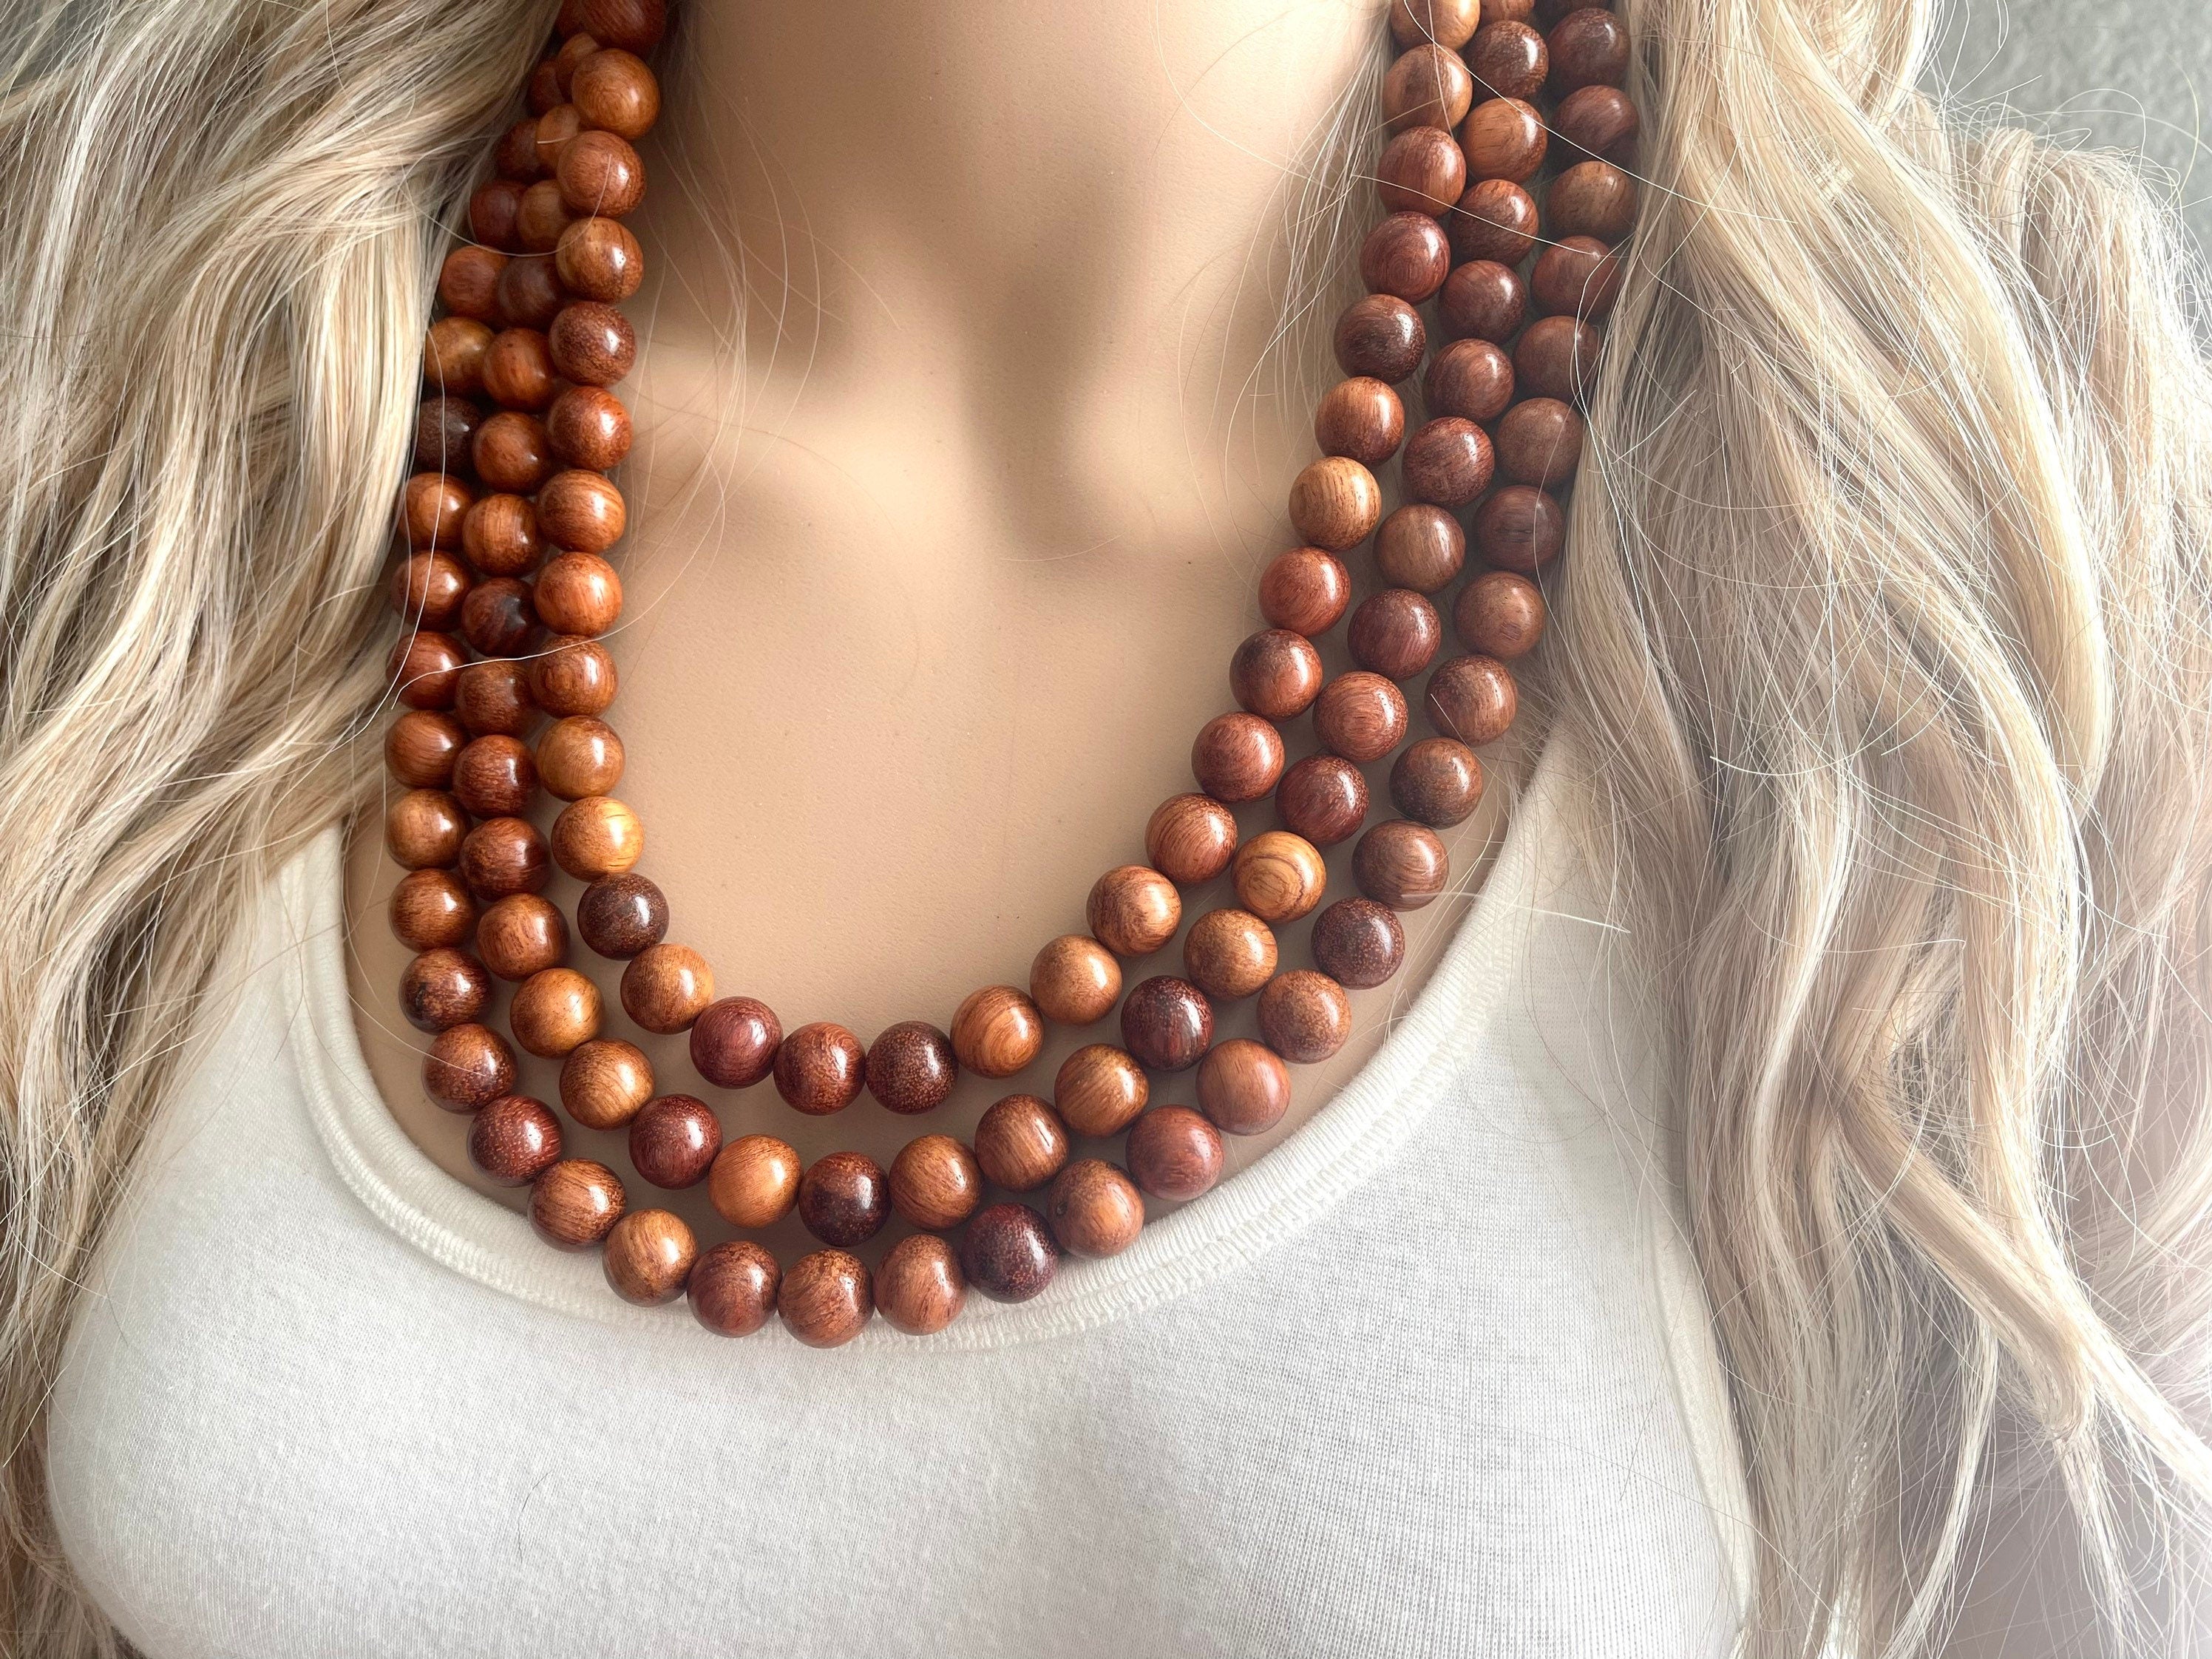 Bead necklace - Brown - Men | H&M IN